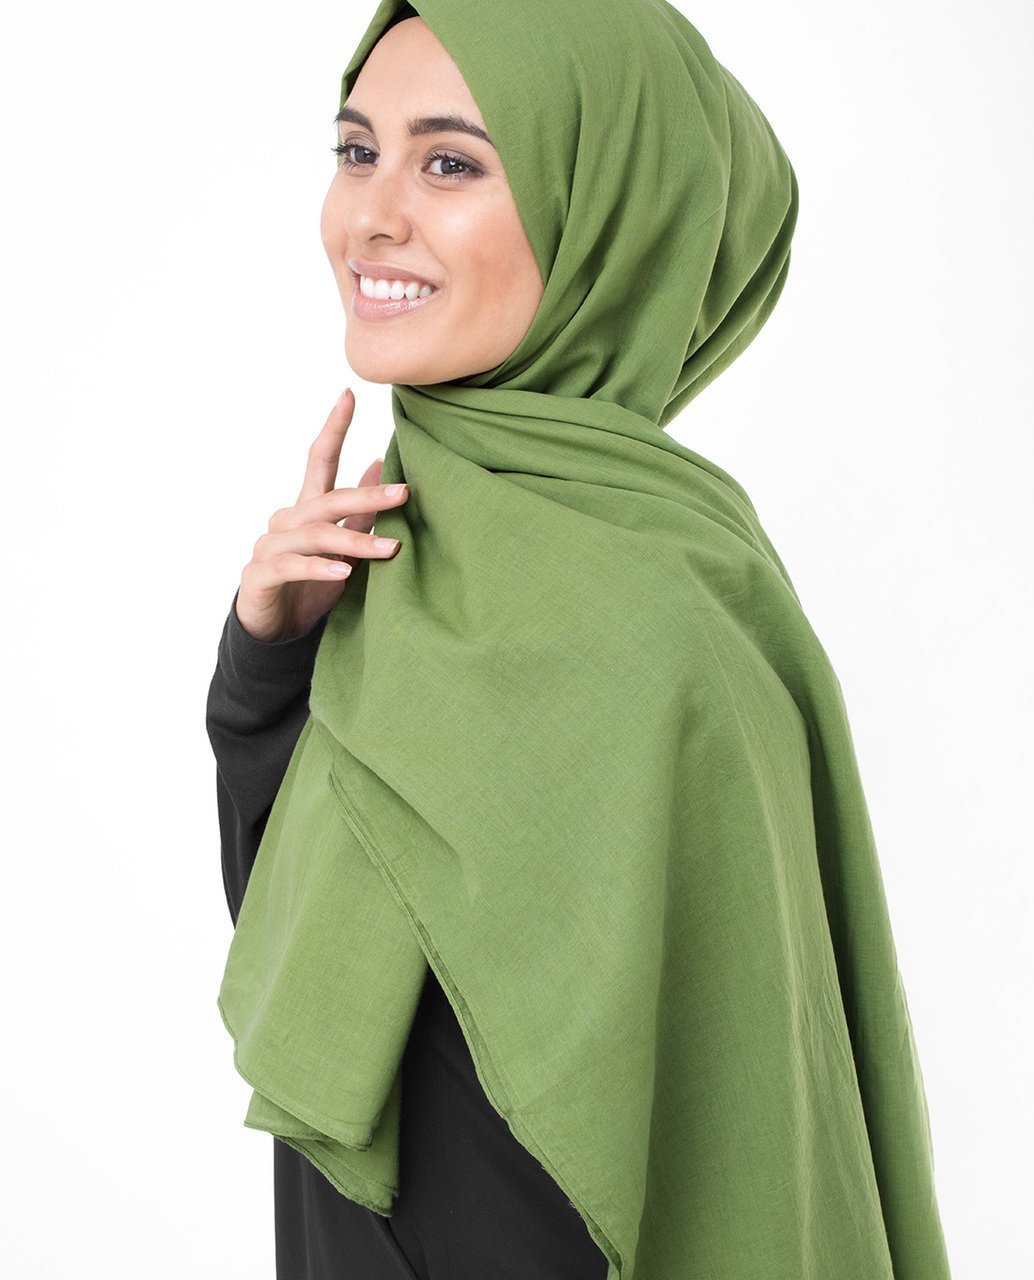 Cotton Voile Hijab in Forest Green Color Regular Forest Green 